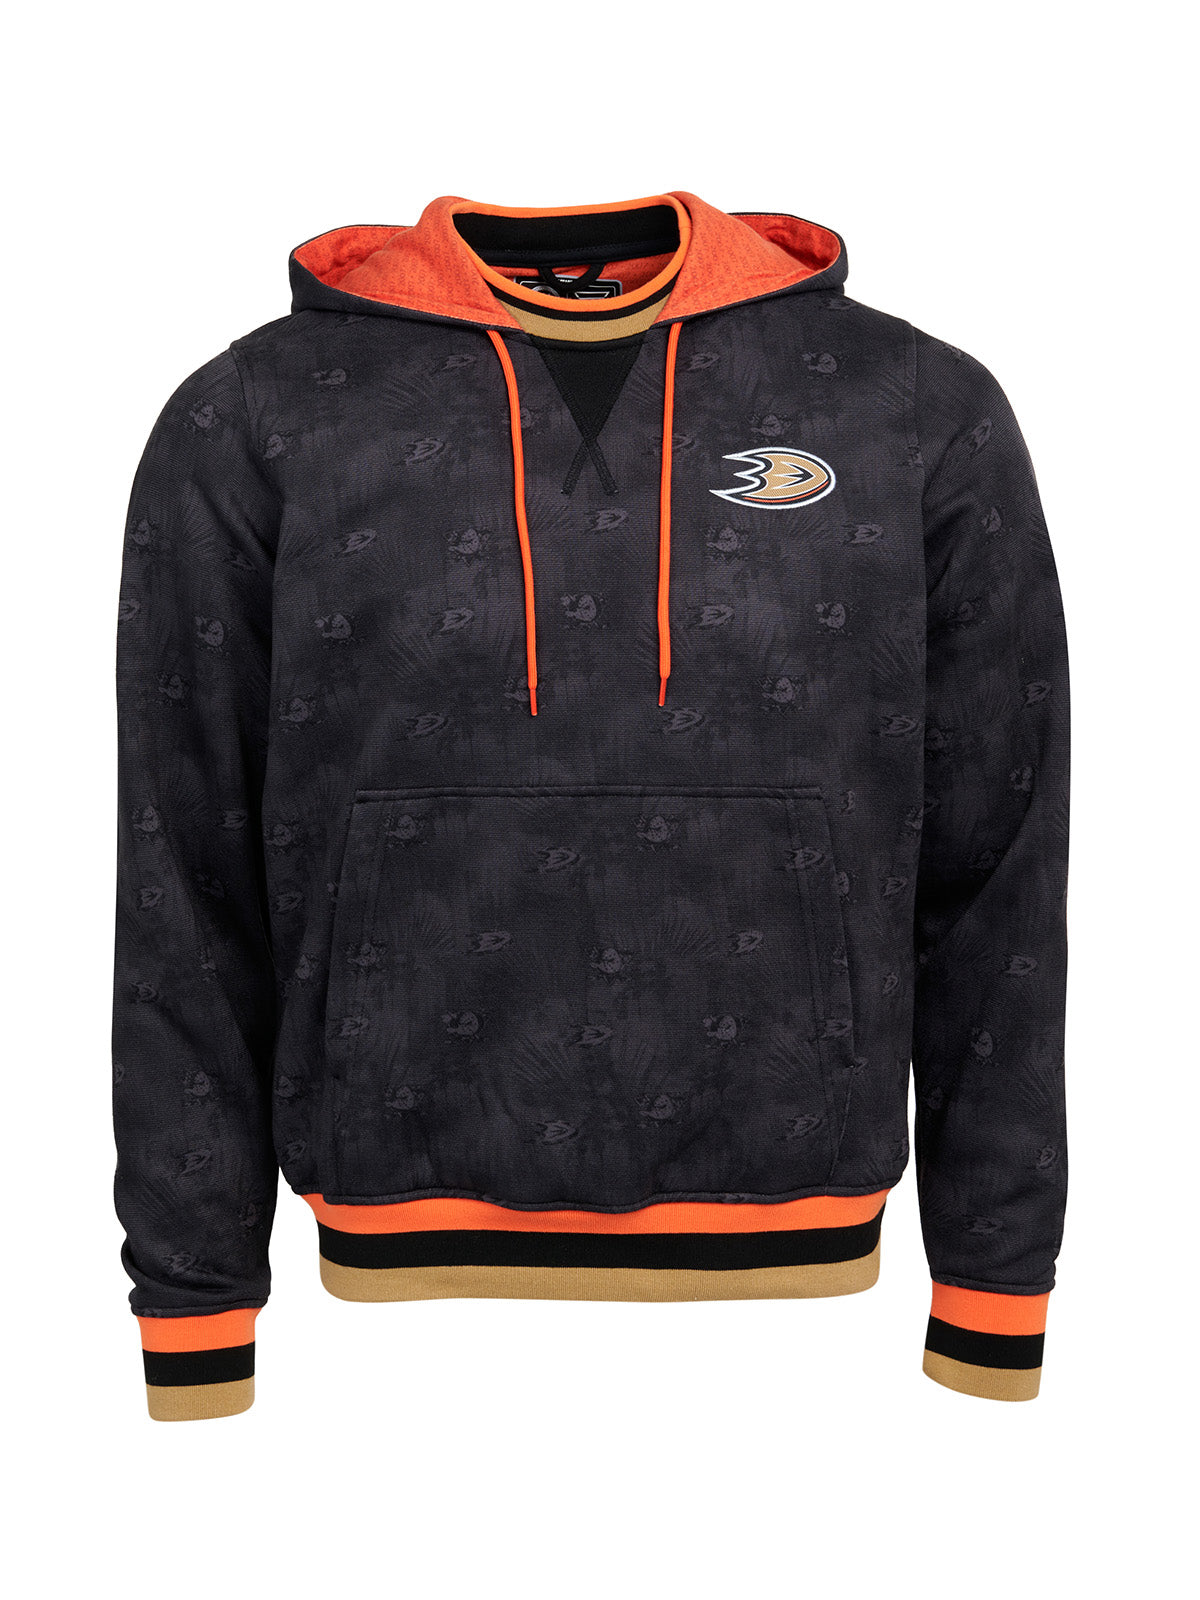 Anaheim Ducks Hoodie - Show your team spirit, with the iconic team logo patch on the front left chest, and proudly display your Anaheim Ducks support in their team colors with this NHL hockey hoodie.